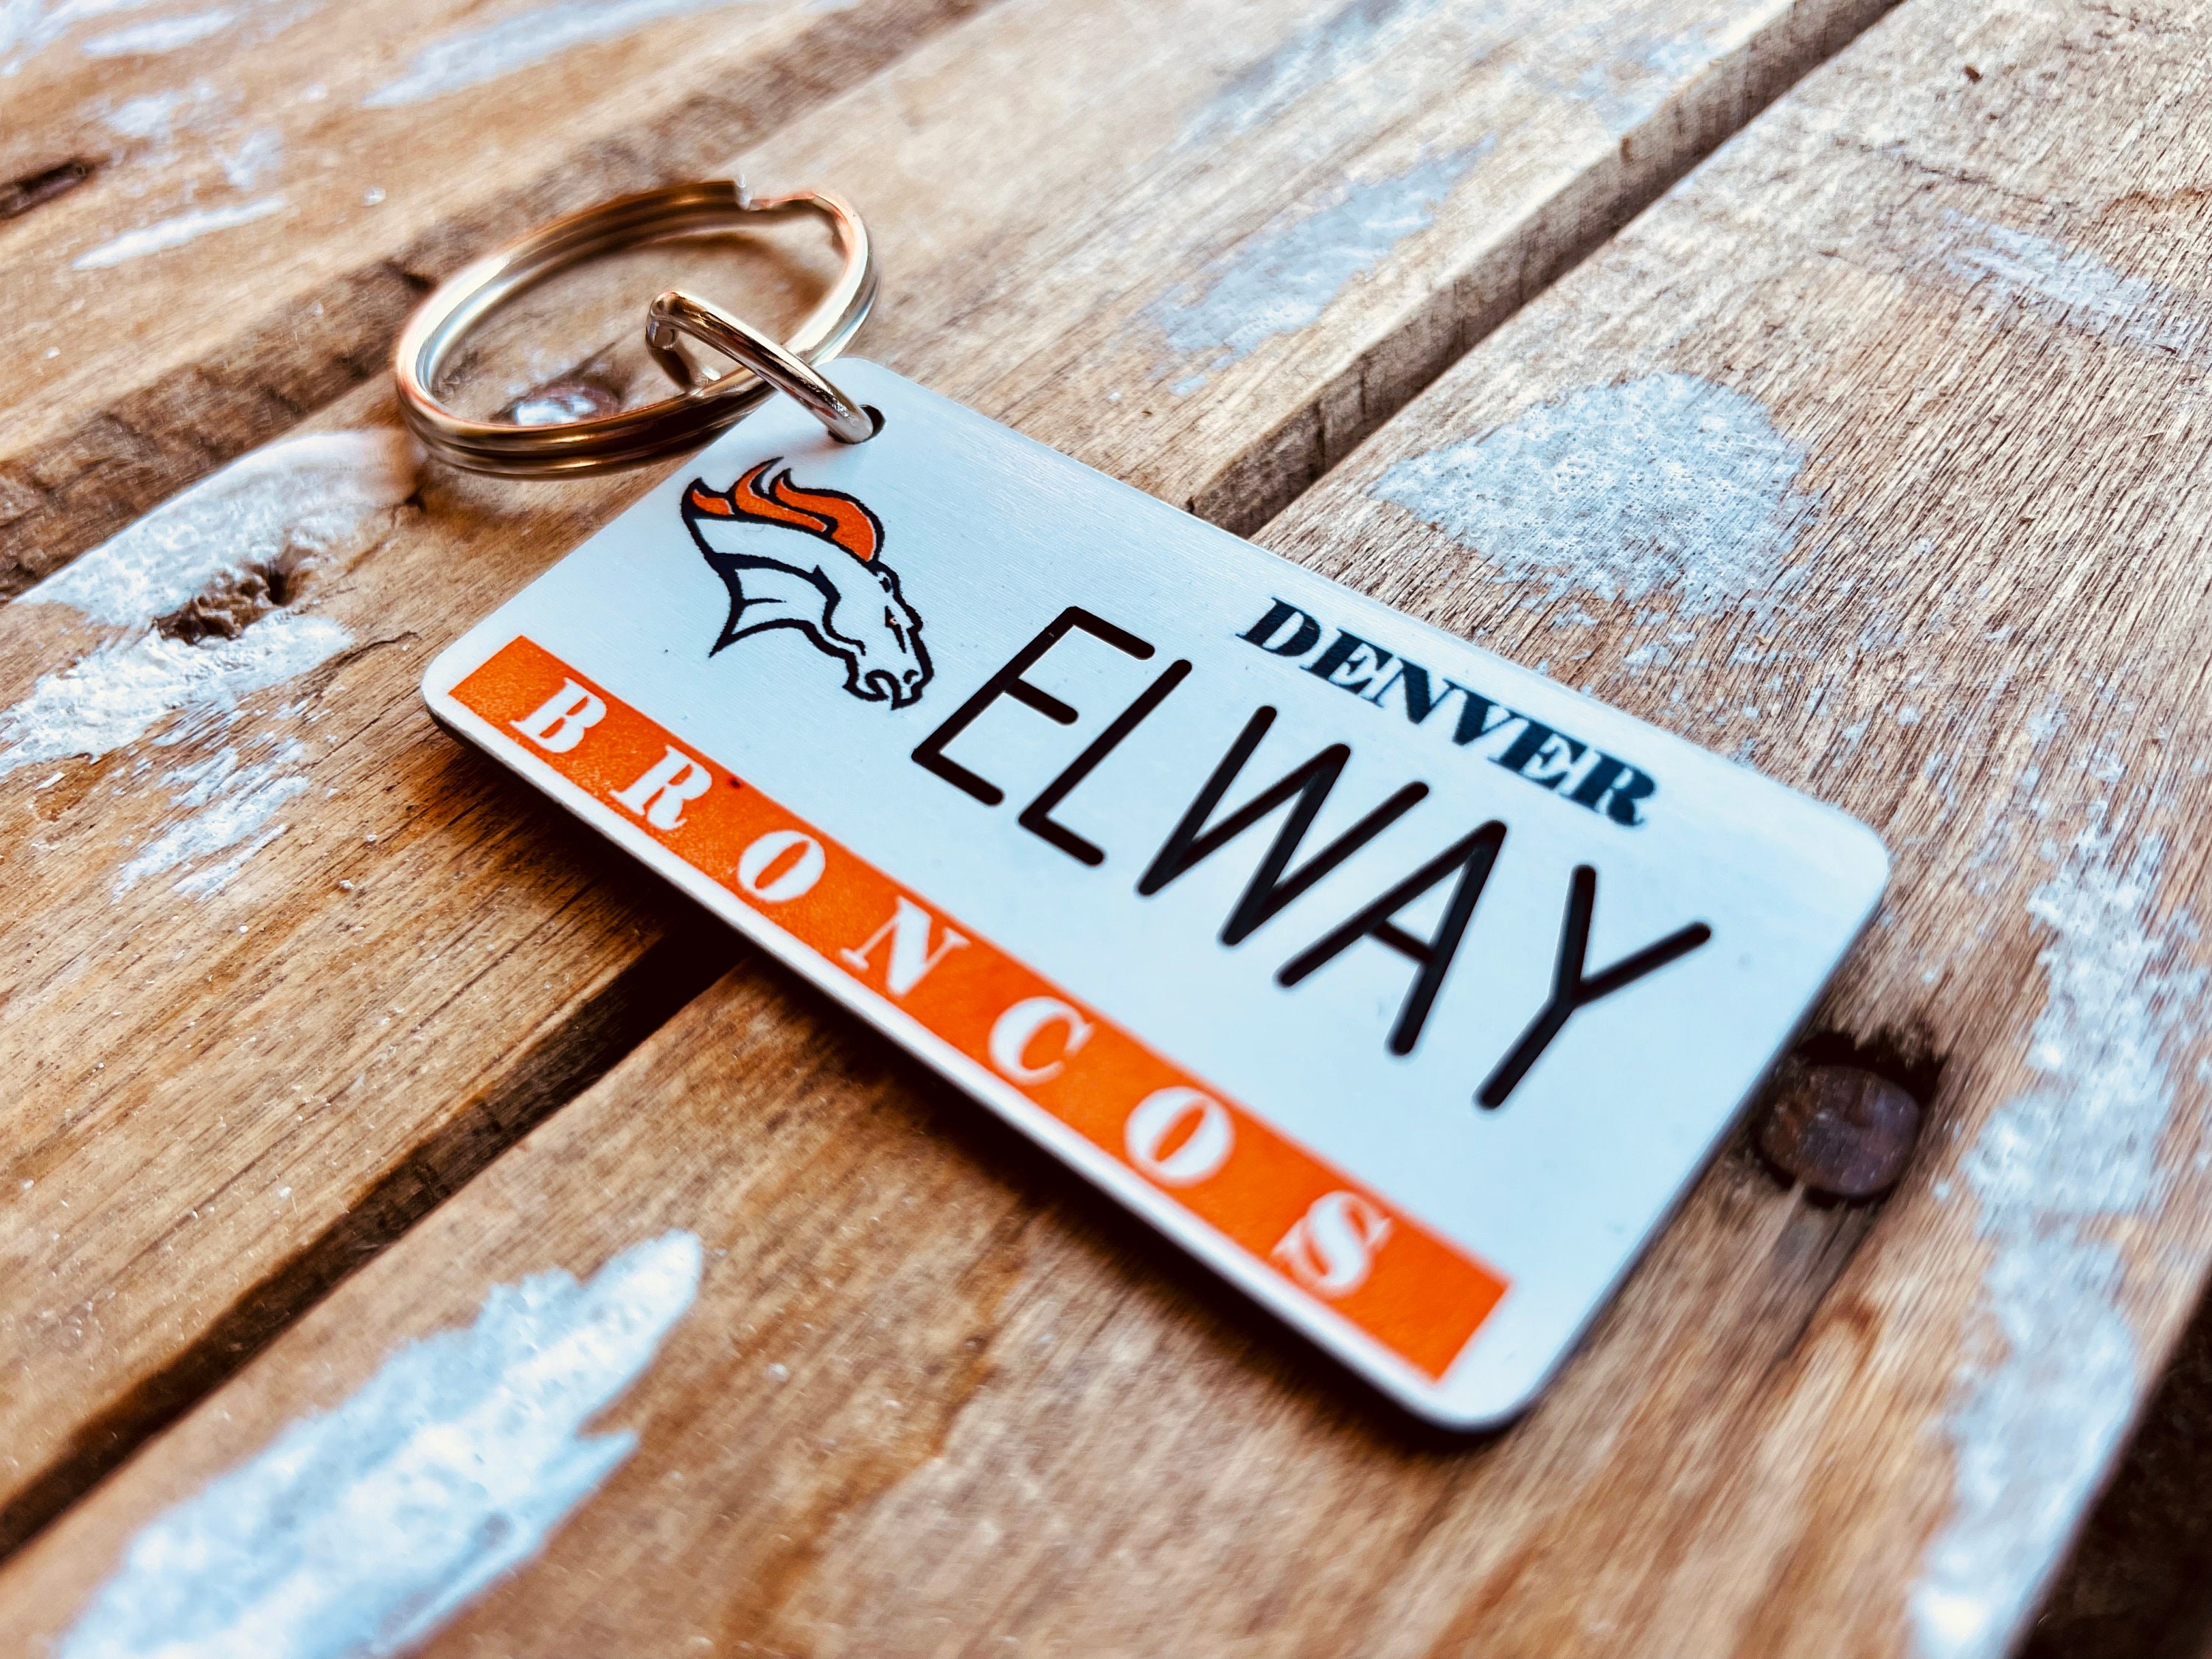 Denver Broncos Official American Football Gift Keyring Birthday Gift Idea For Men And Boys A Great Christmas 